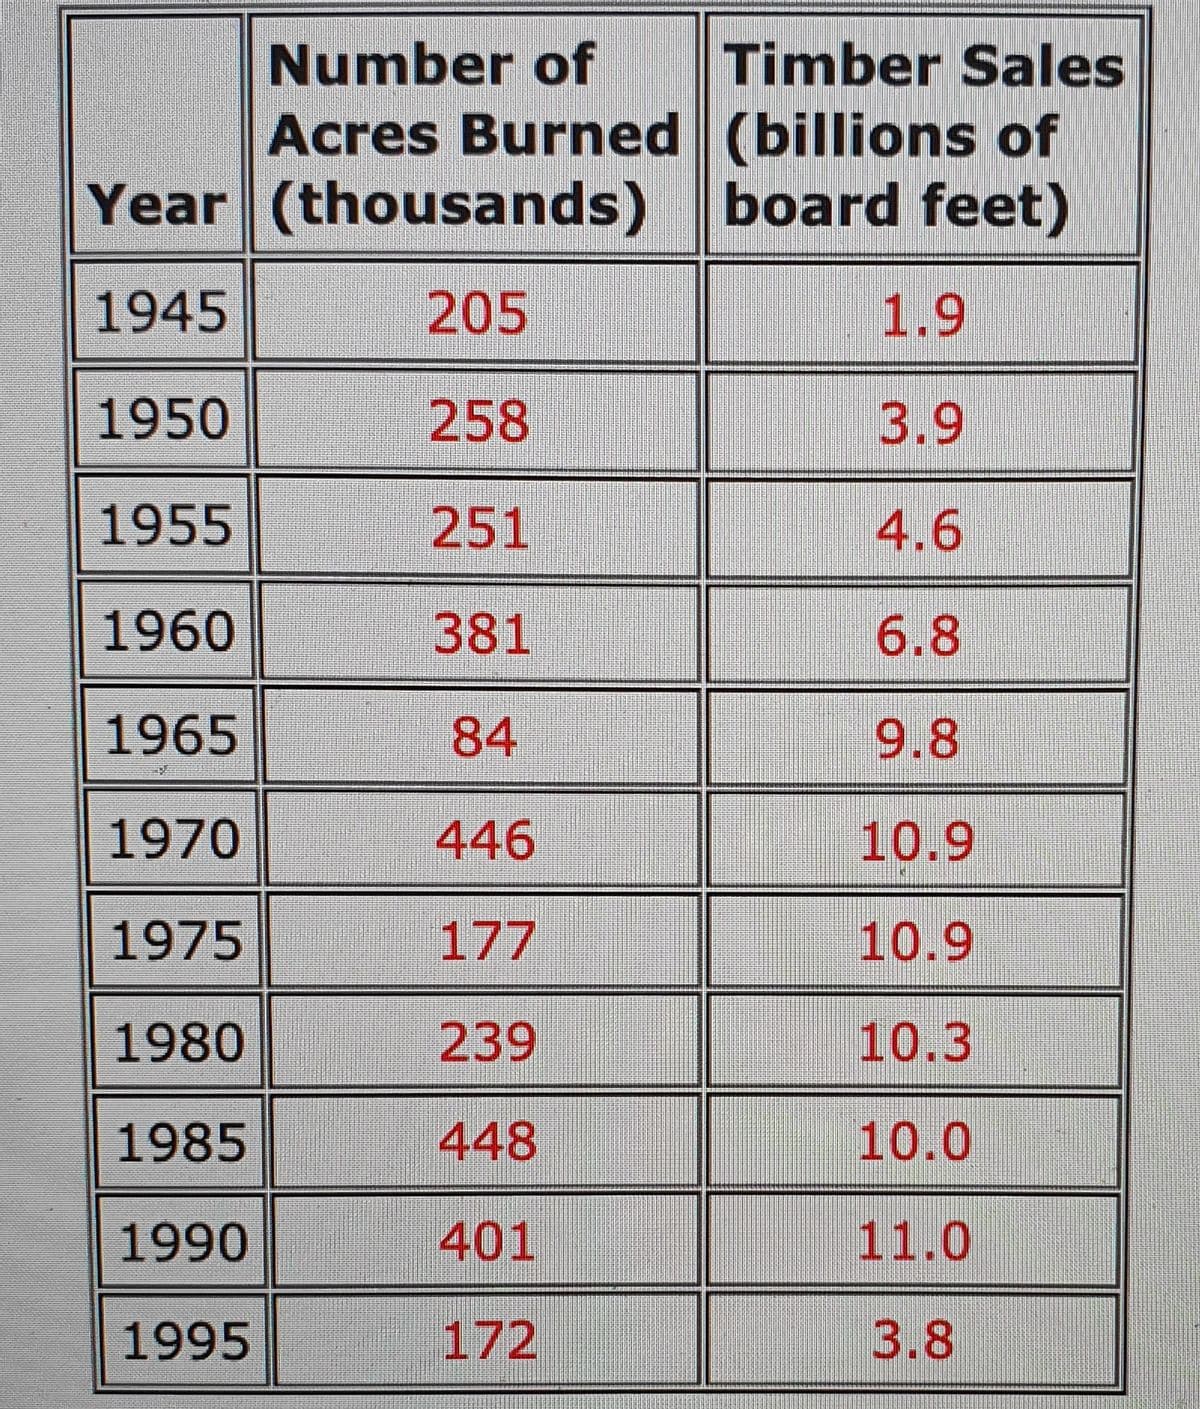 Number of
Timber Sales
Acres Burned (billions of
Year (thousands) board feet)
1945
205
1.9
1950
258
3.9
1955
251
4.6
1960
381
6.8
1965
84
9.8
1970
446
10.9
1975
177
10.9
1980
239
10.3
1985
448
10.0
1990
401
11.0
1995
172
3.8
